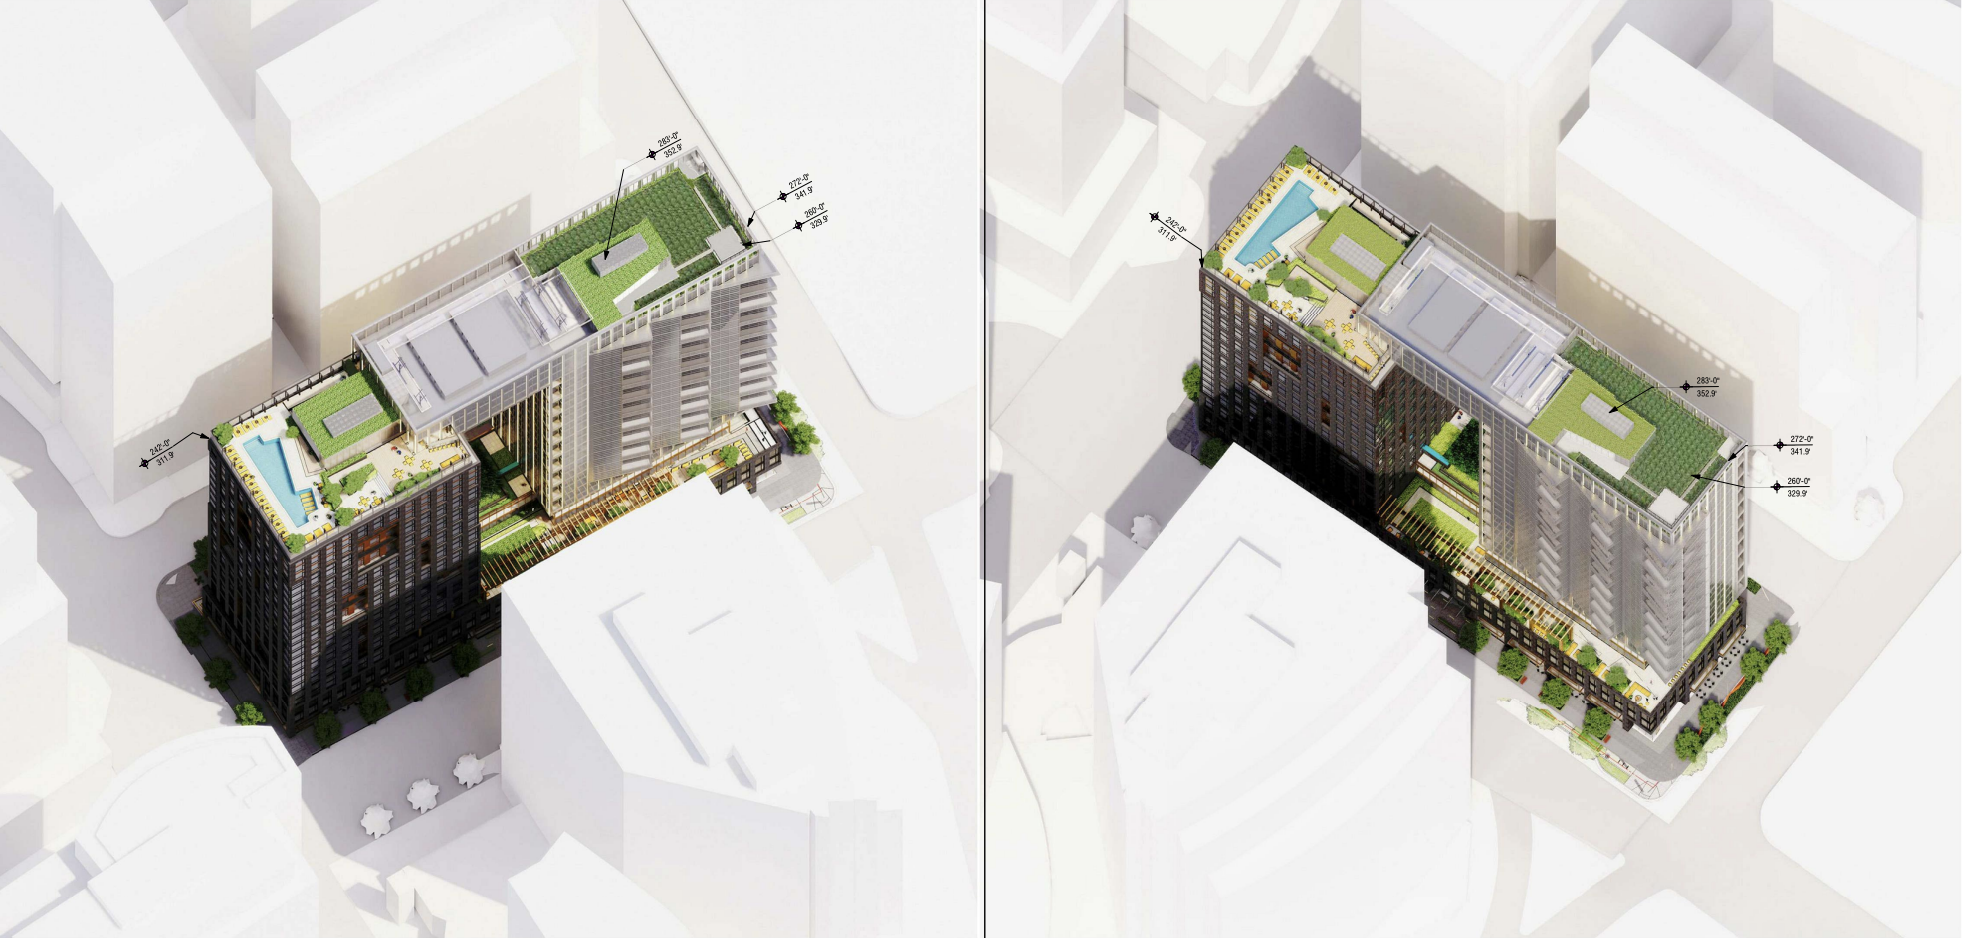 Rendering shows rooftop pool and terrace of 27-story luxury towers